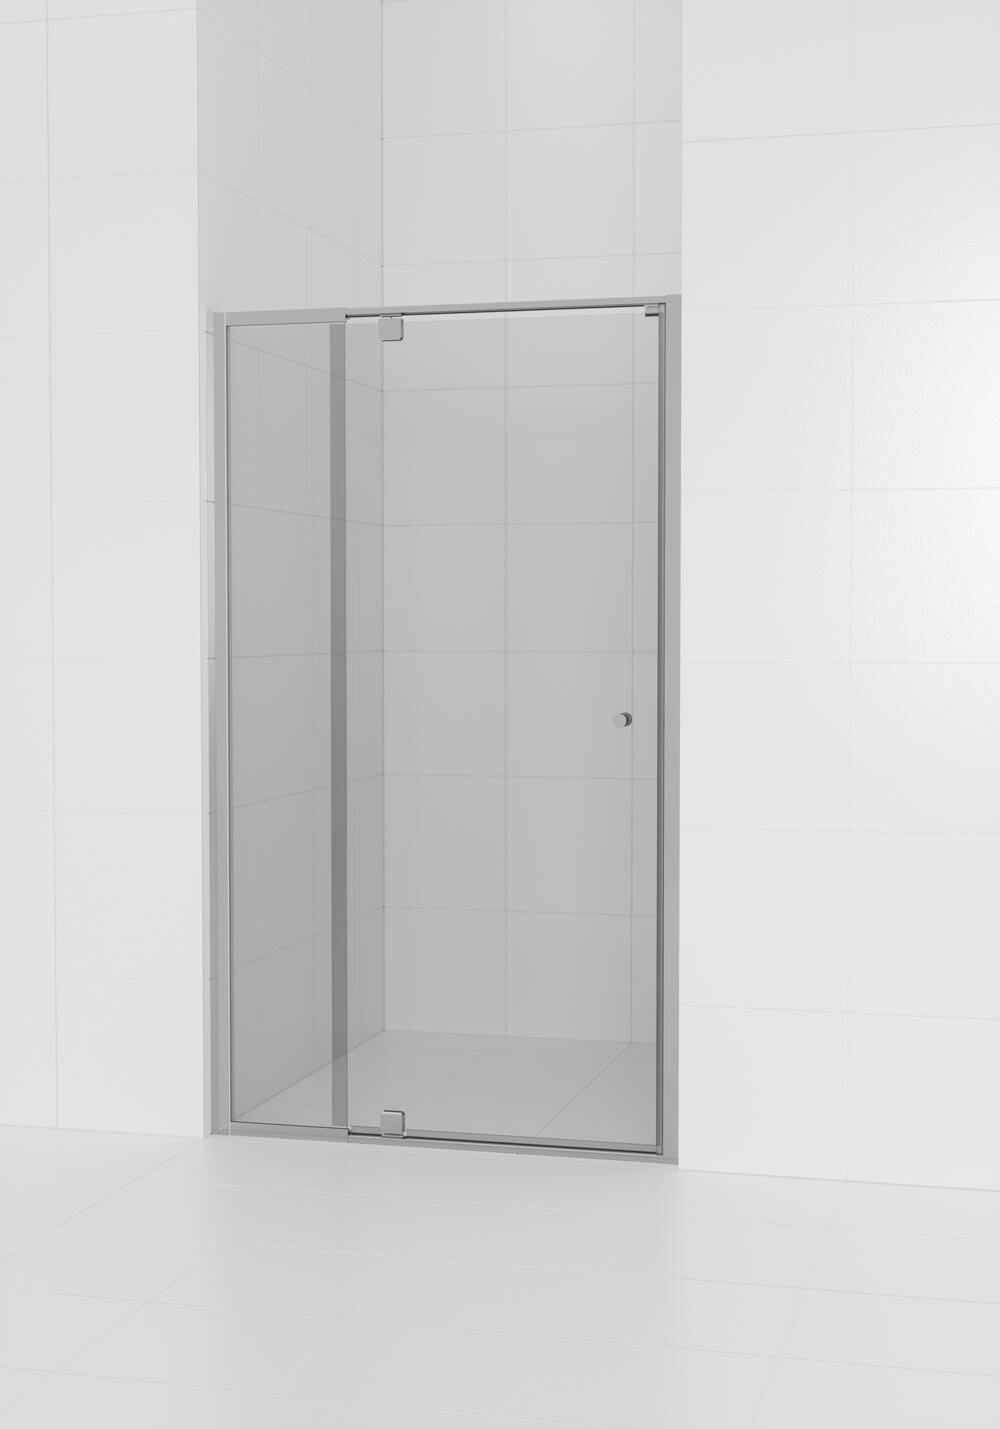 Semi Frameless Shower Screen Wall to Wall With Magnetic Pivot Door 1950H adjustable